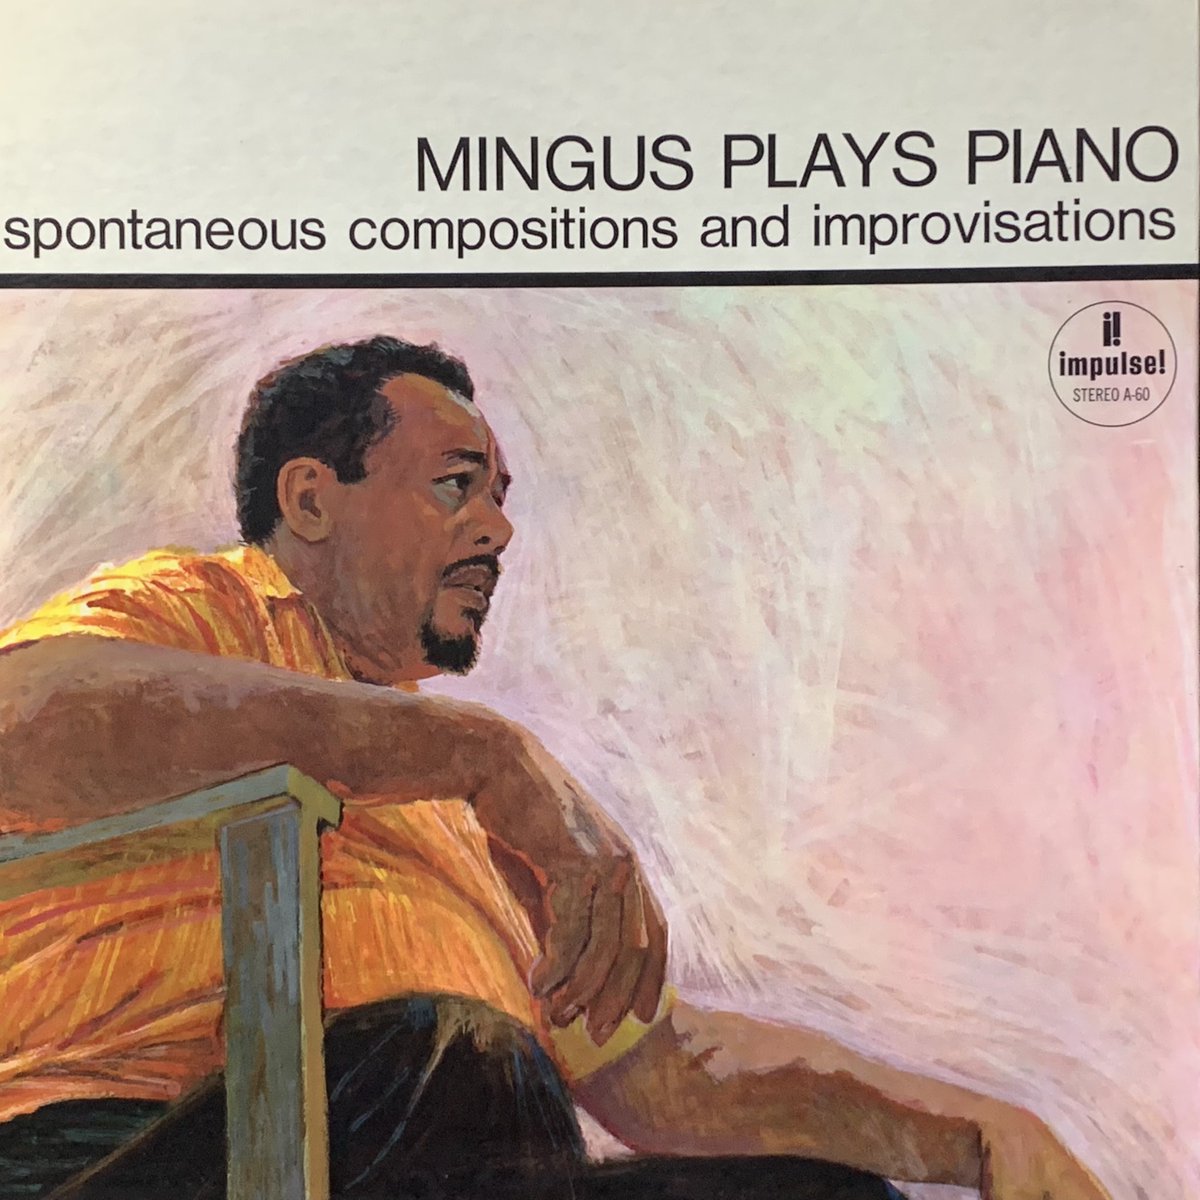 MINGUS PLAYS PIANO Recorded July 30, 1963